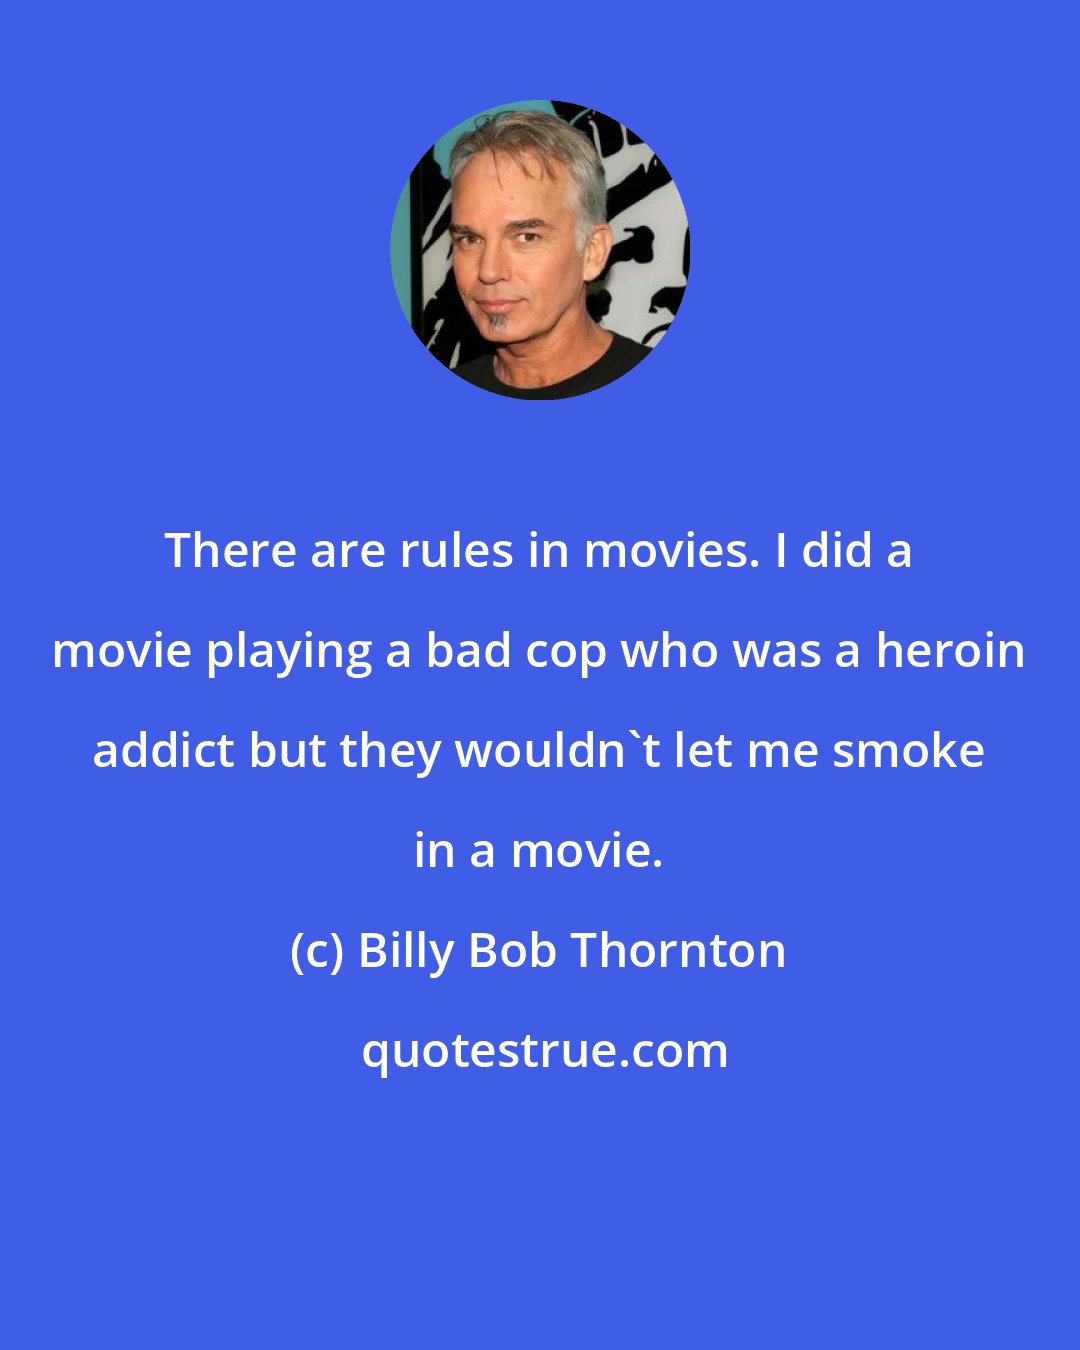 Billy Bob Thornton: There are rules in movies. I did a movie playing a bad cop who was a heroin addict but they wouldn't let me smoke in a movie.